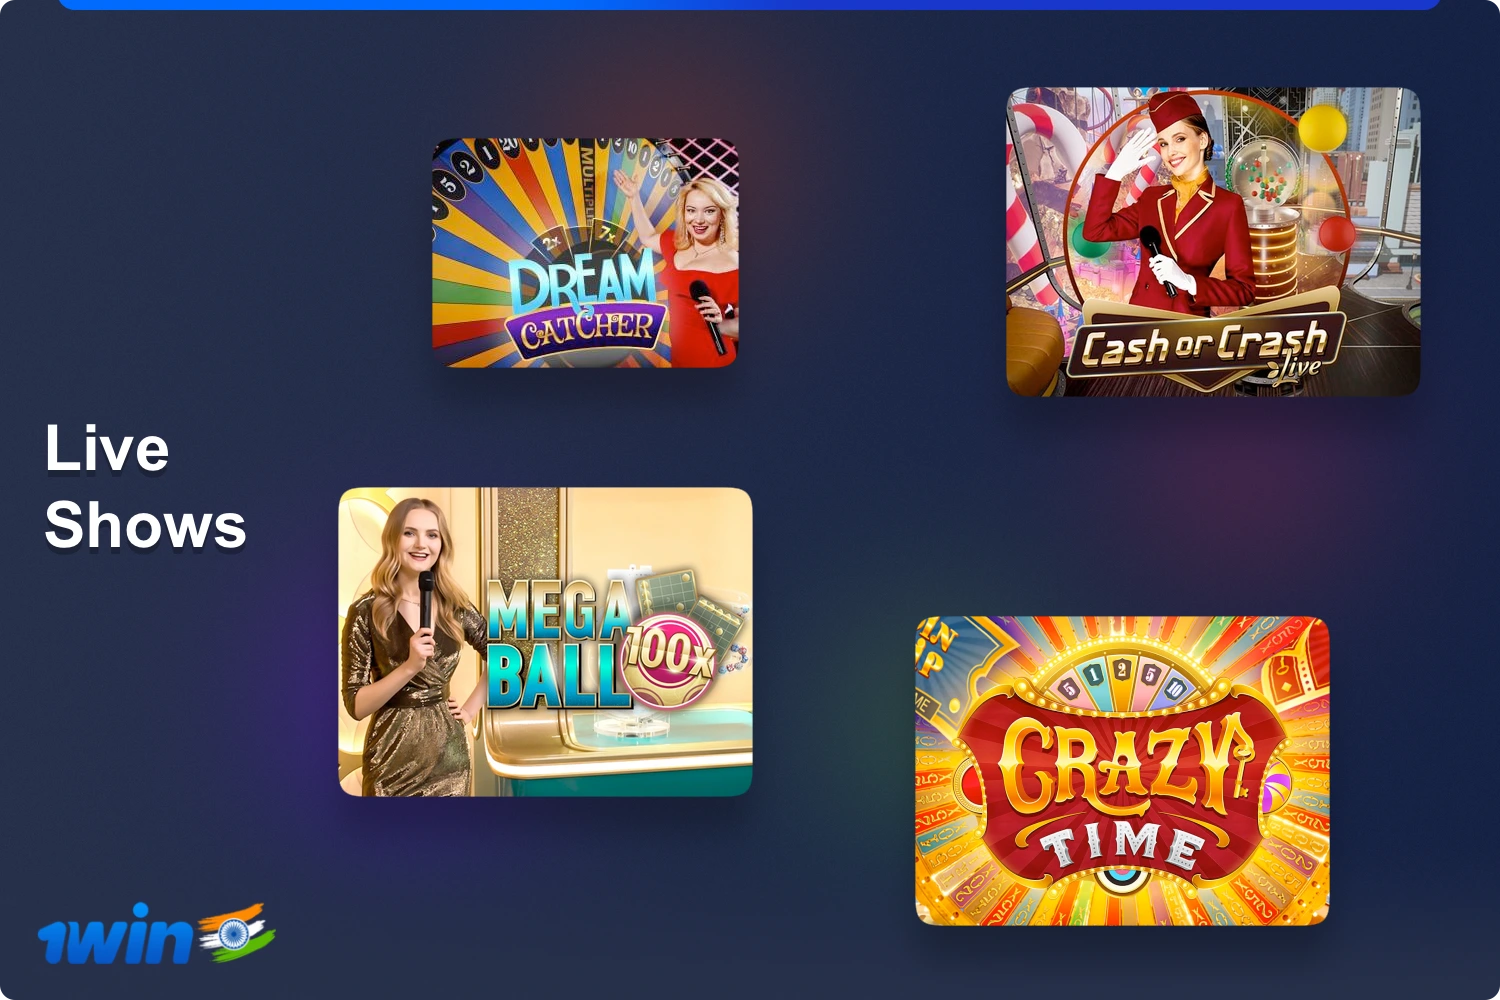 Live shows at 1win Casino are very popular with players from India